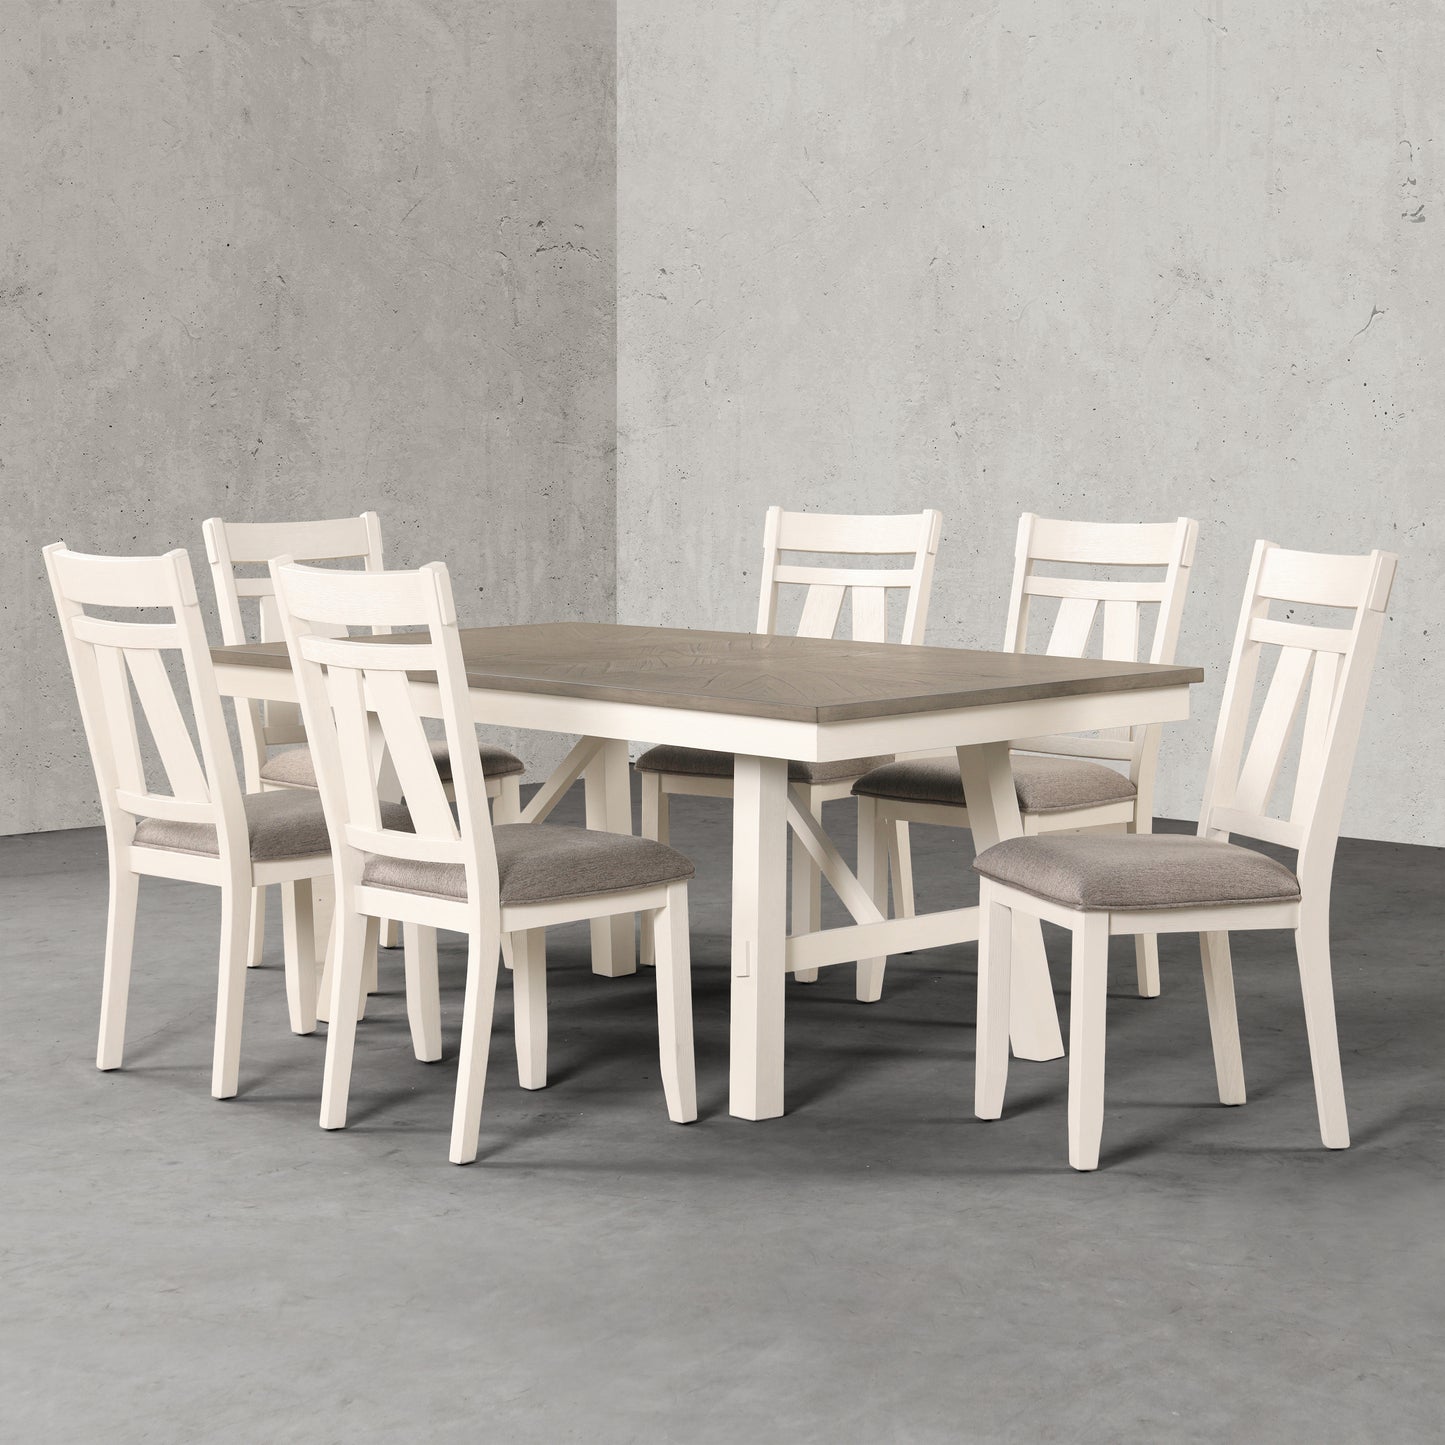 Roundhill Furniture Fasena 7-Piece Dining Set, Trestle Dining Table with 6 Chairs in Rustic Gray and Off White Finish